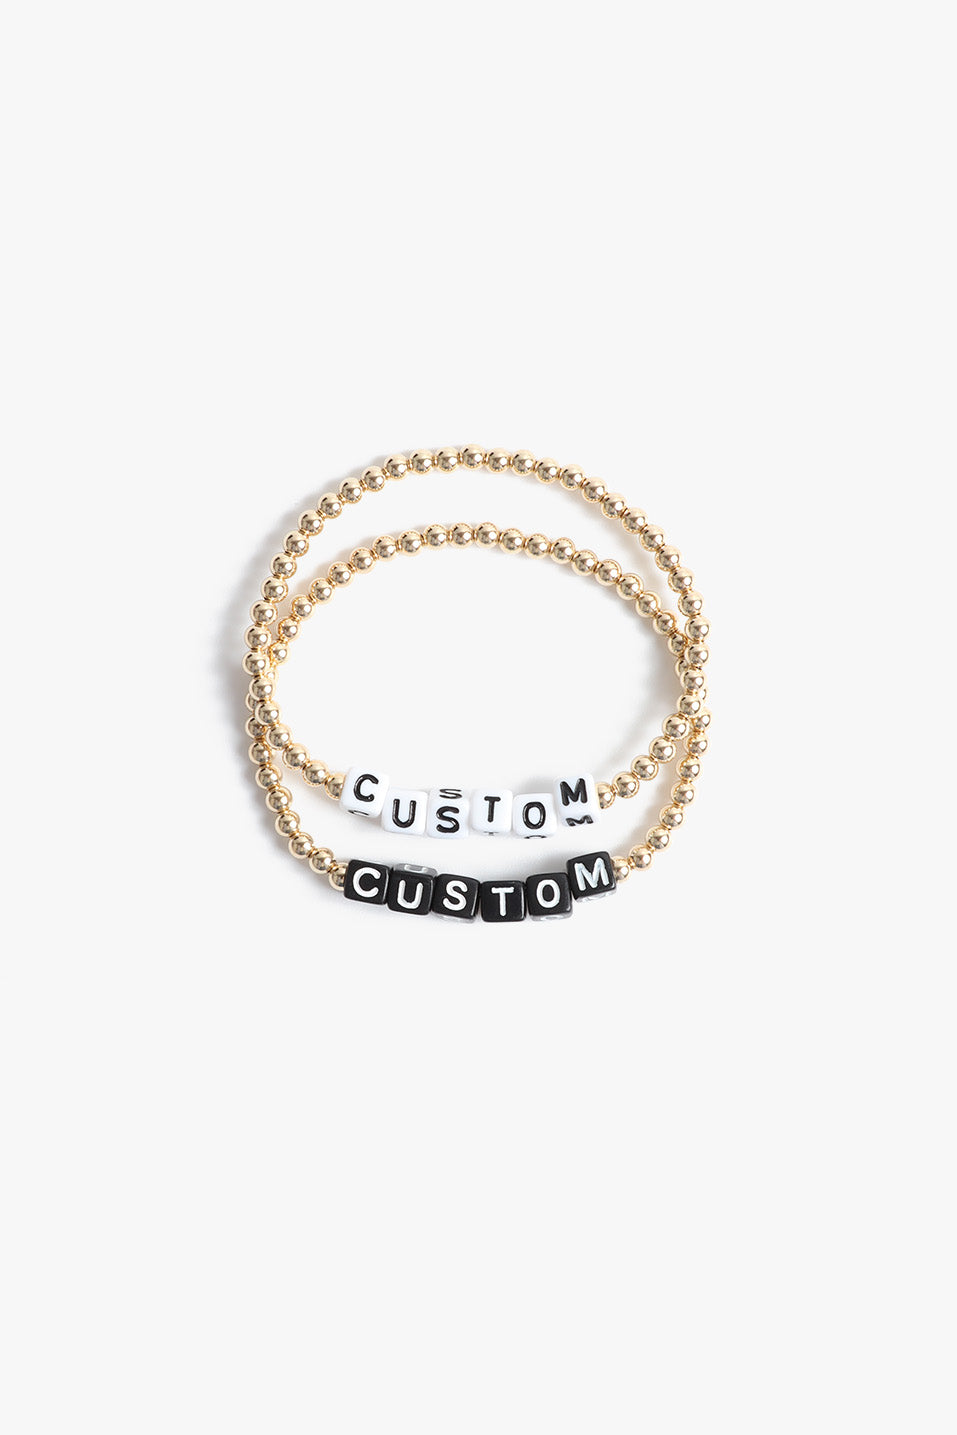 Marin Costello Jewelry Crown Letter Bracelet beaded block letter bracelet, customizable. Black or white block letters, gold or silver beads. Waterproof, sustainable, hypoallergenic. 14k gold plated stainless steel.